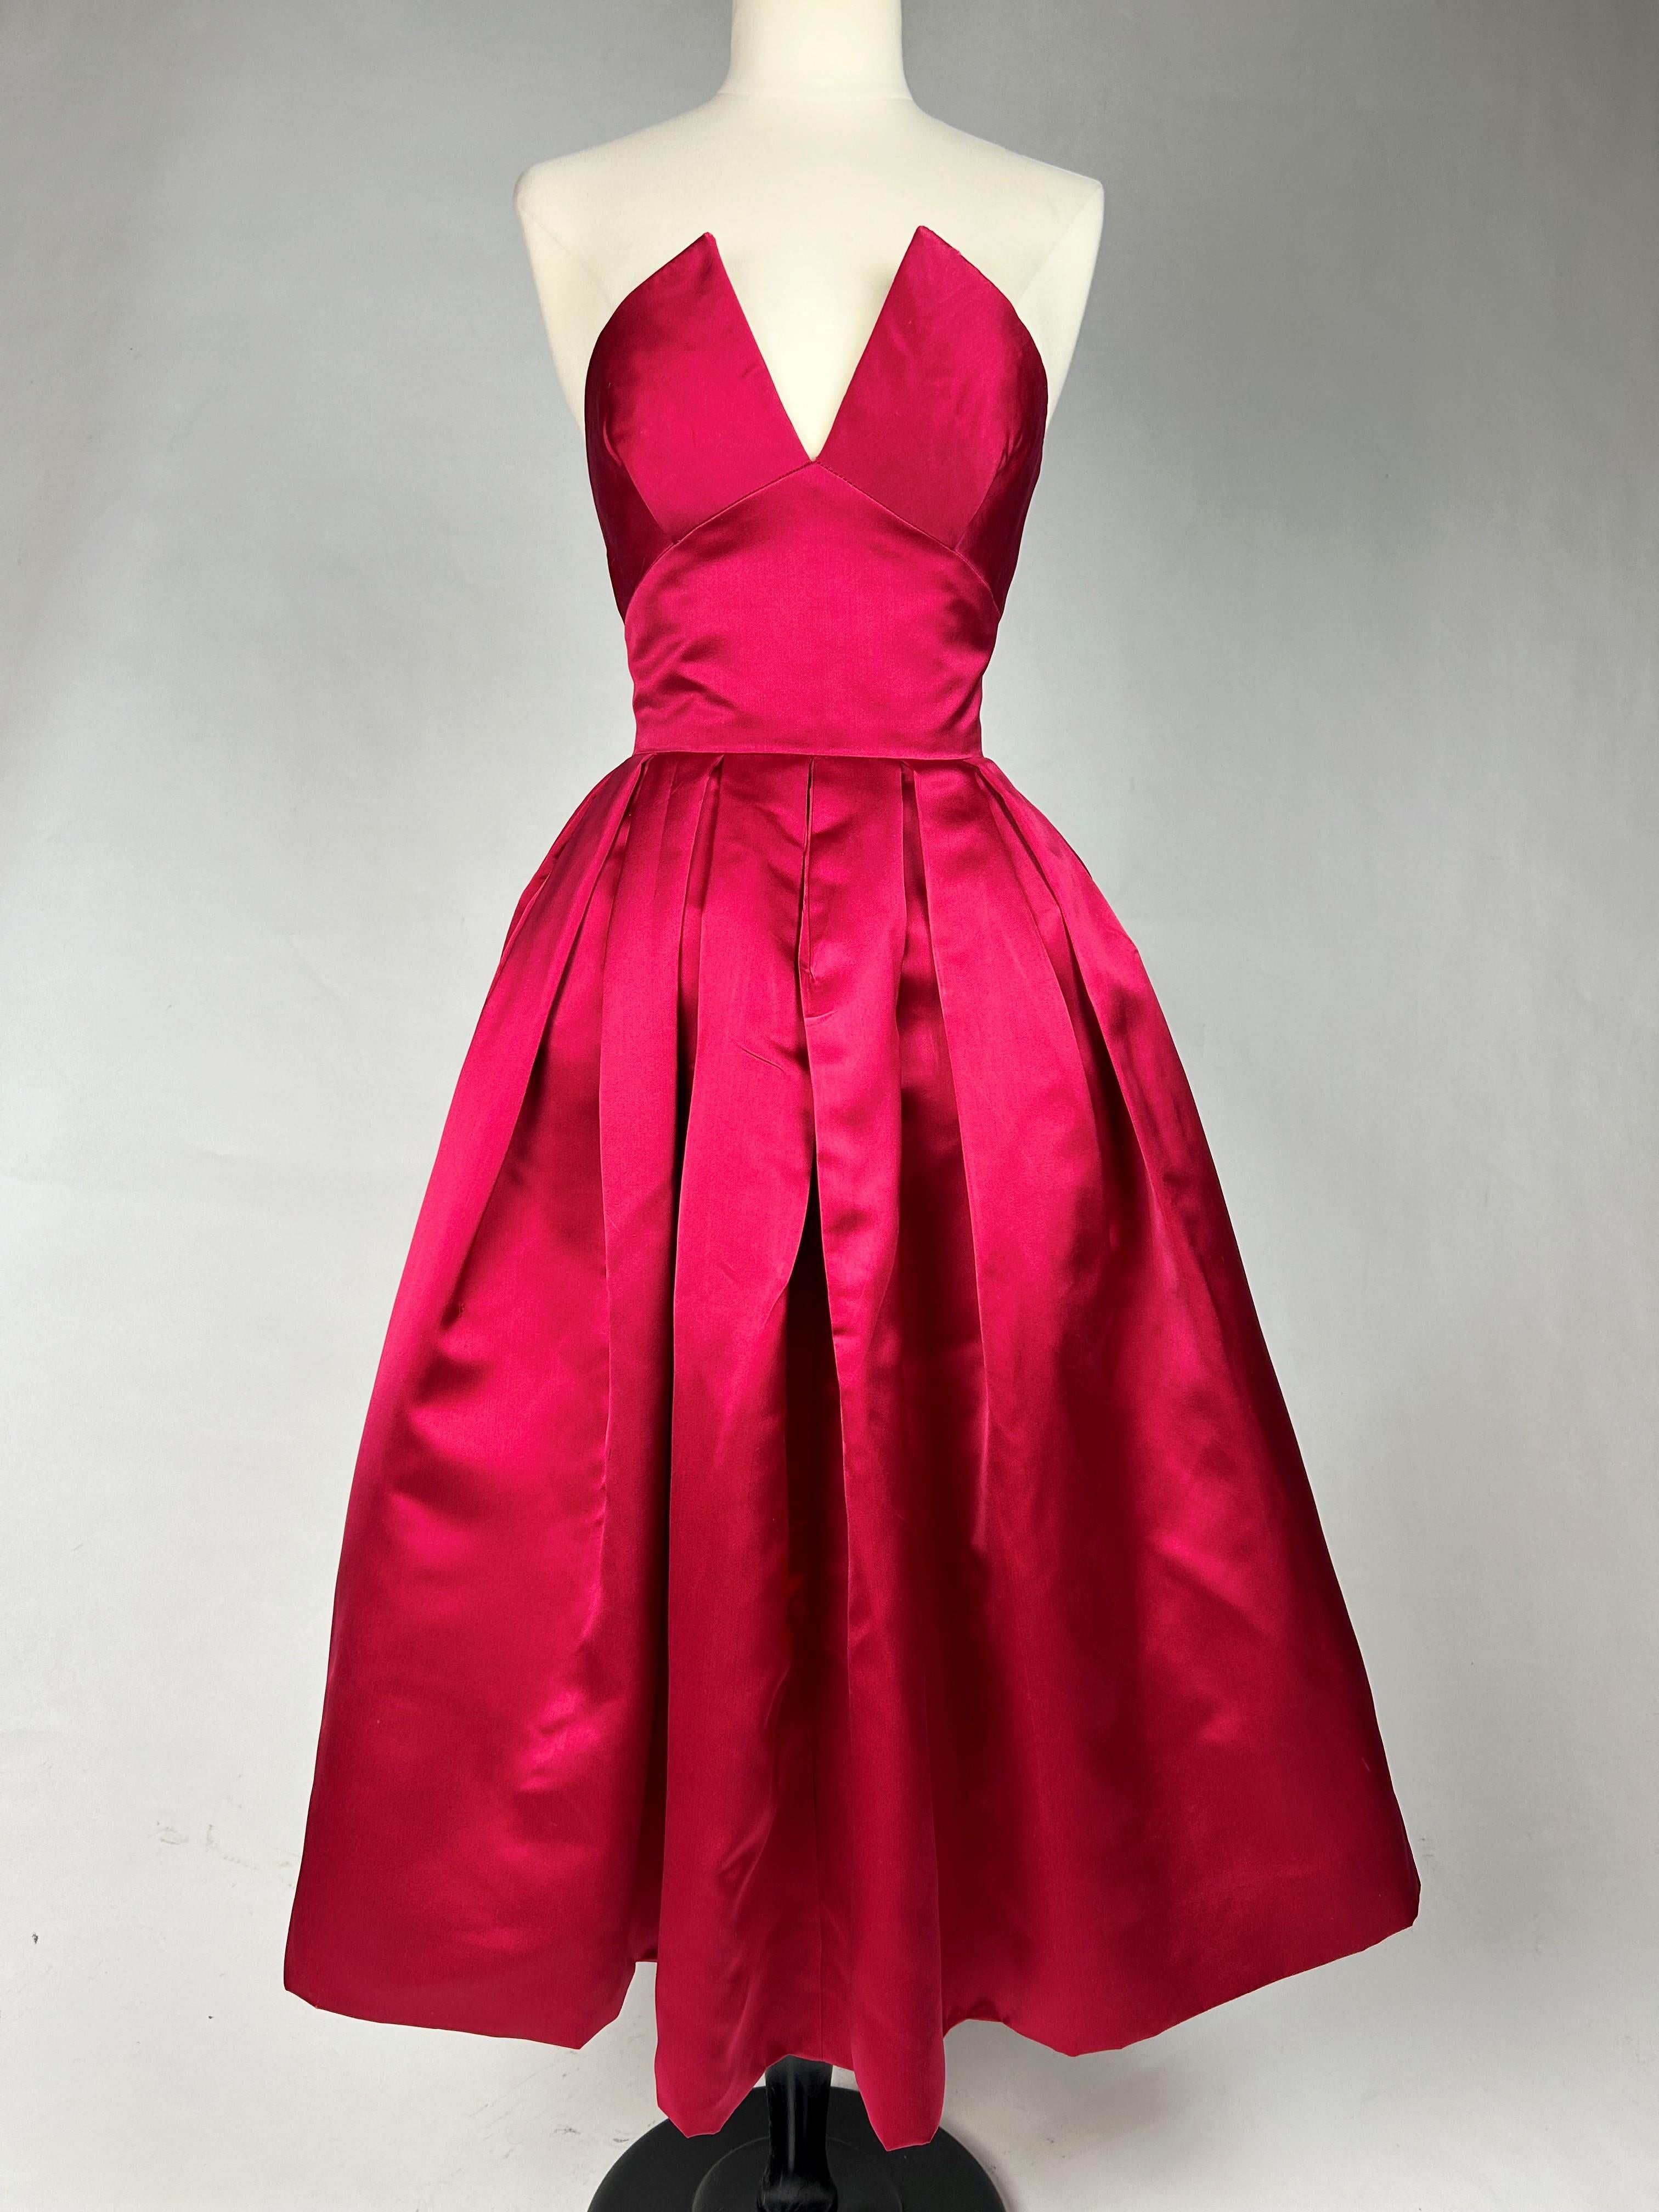 Cocktail dress in raspberry satin in the style of Christian Dior - Paris C. 1955 3